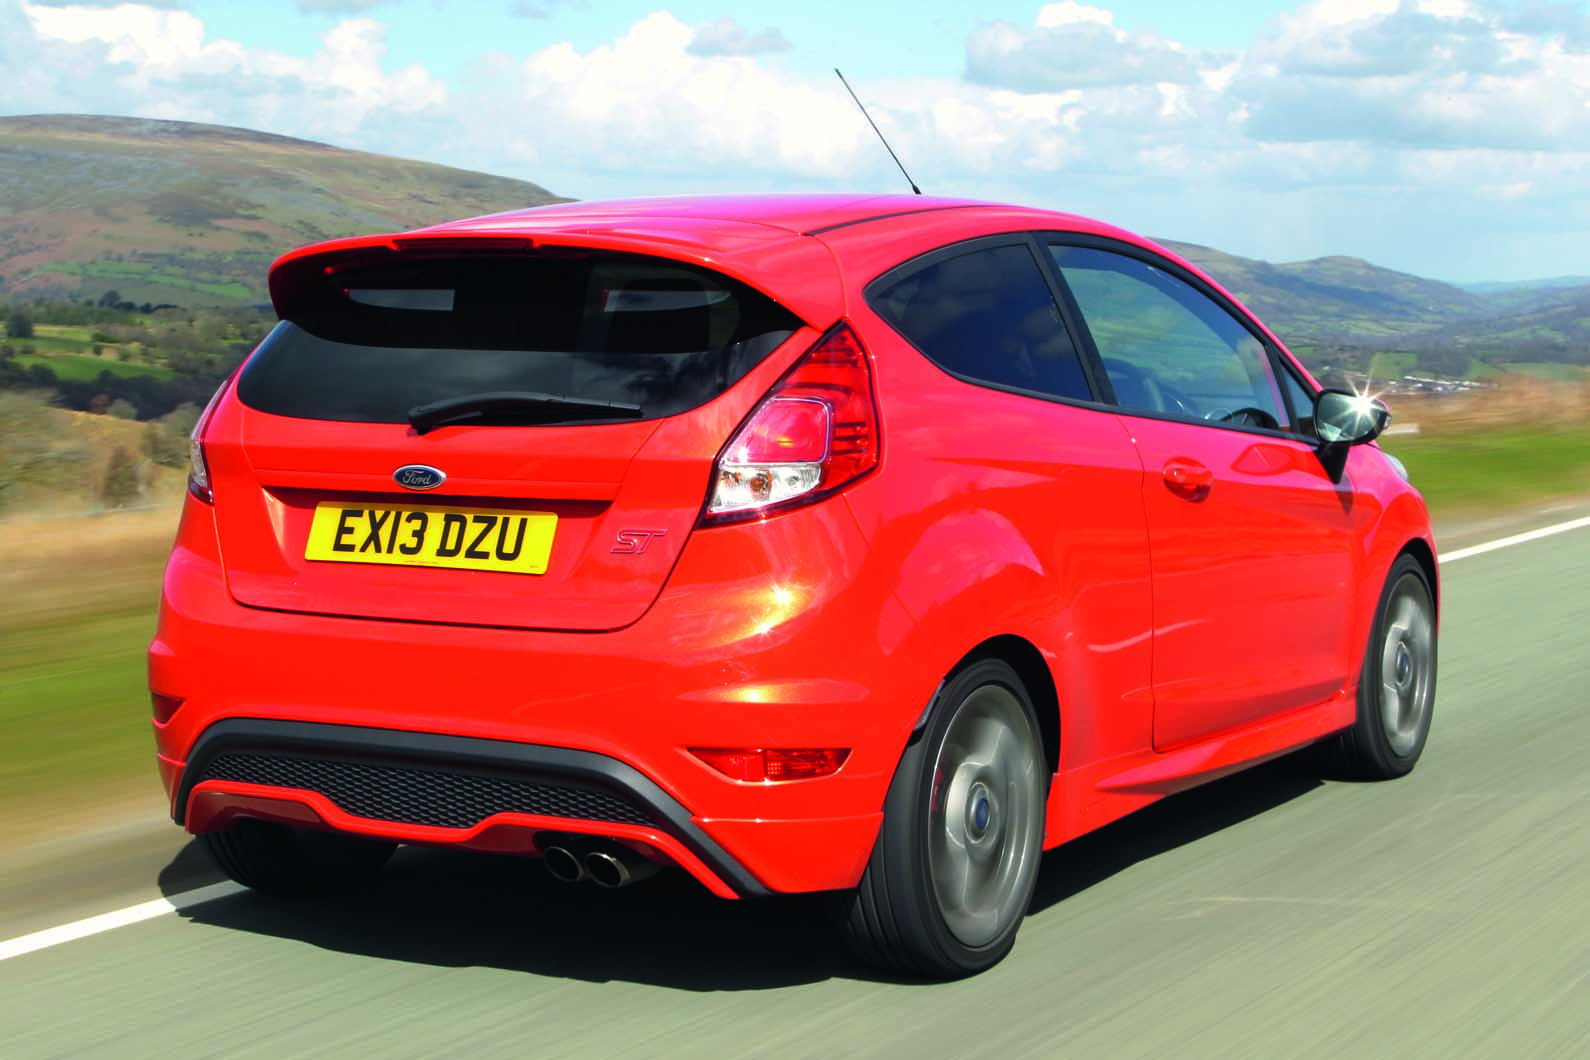 Used car buying guide: Ford Fiesta ST